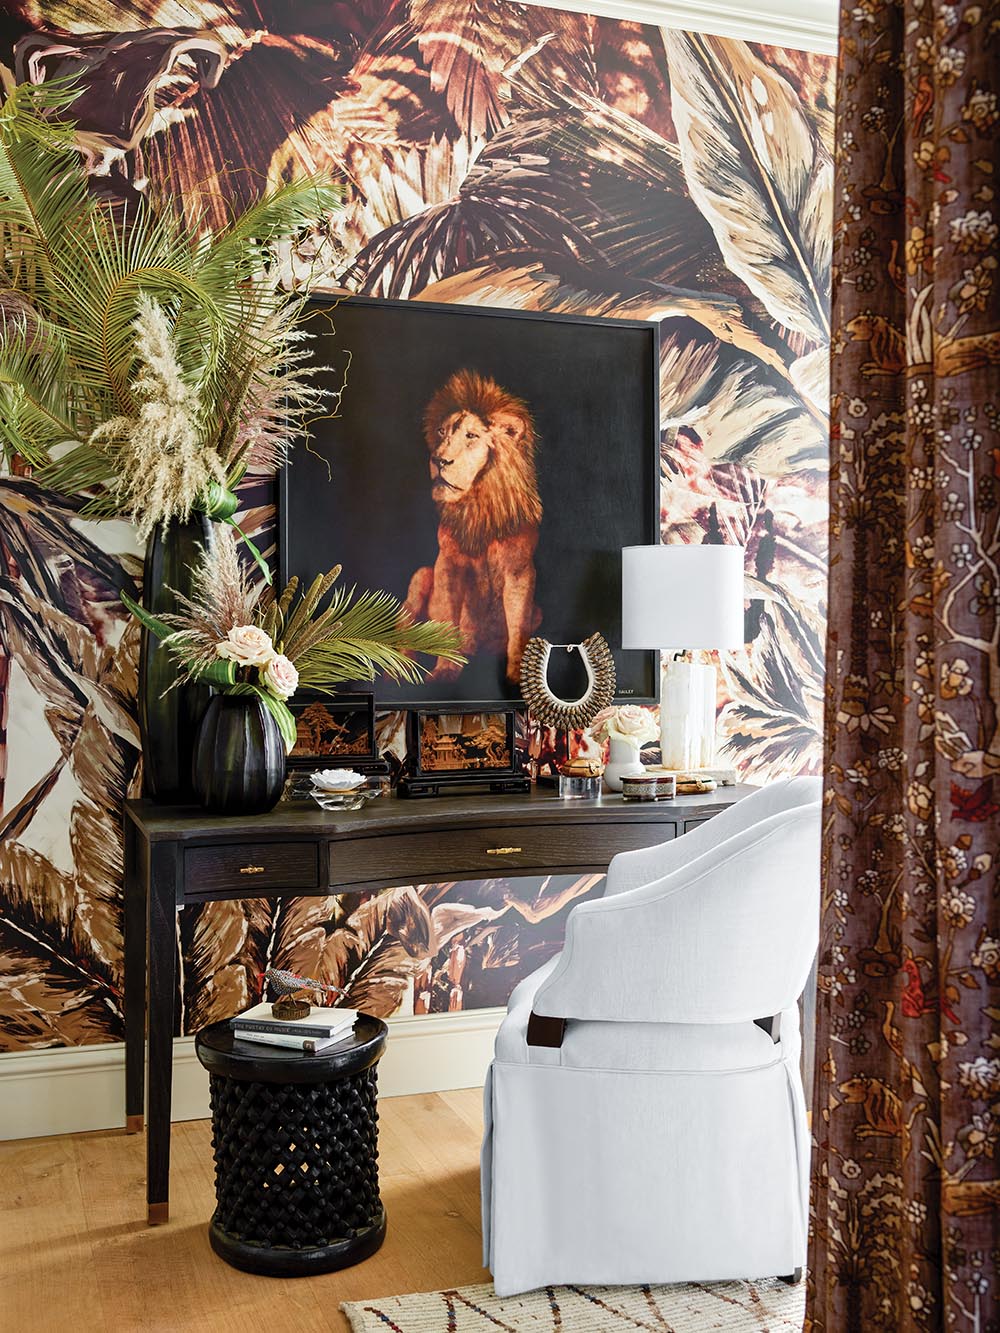 Desk with painting of lioness hanging atop jungle-print wallpaper. Tropical-inspired floral arrangements on desk.